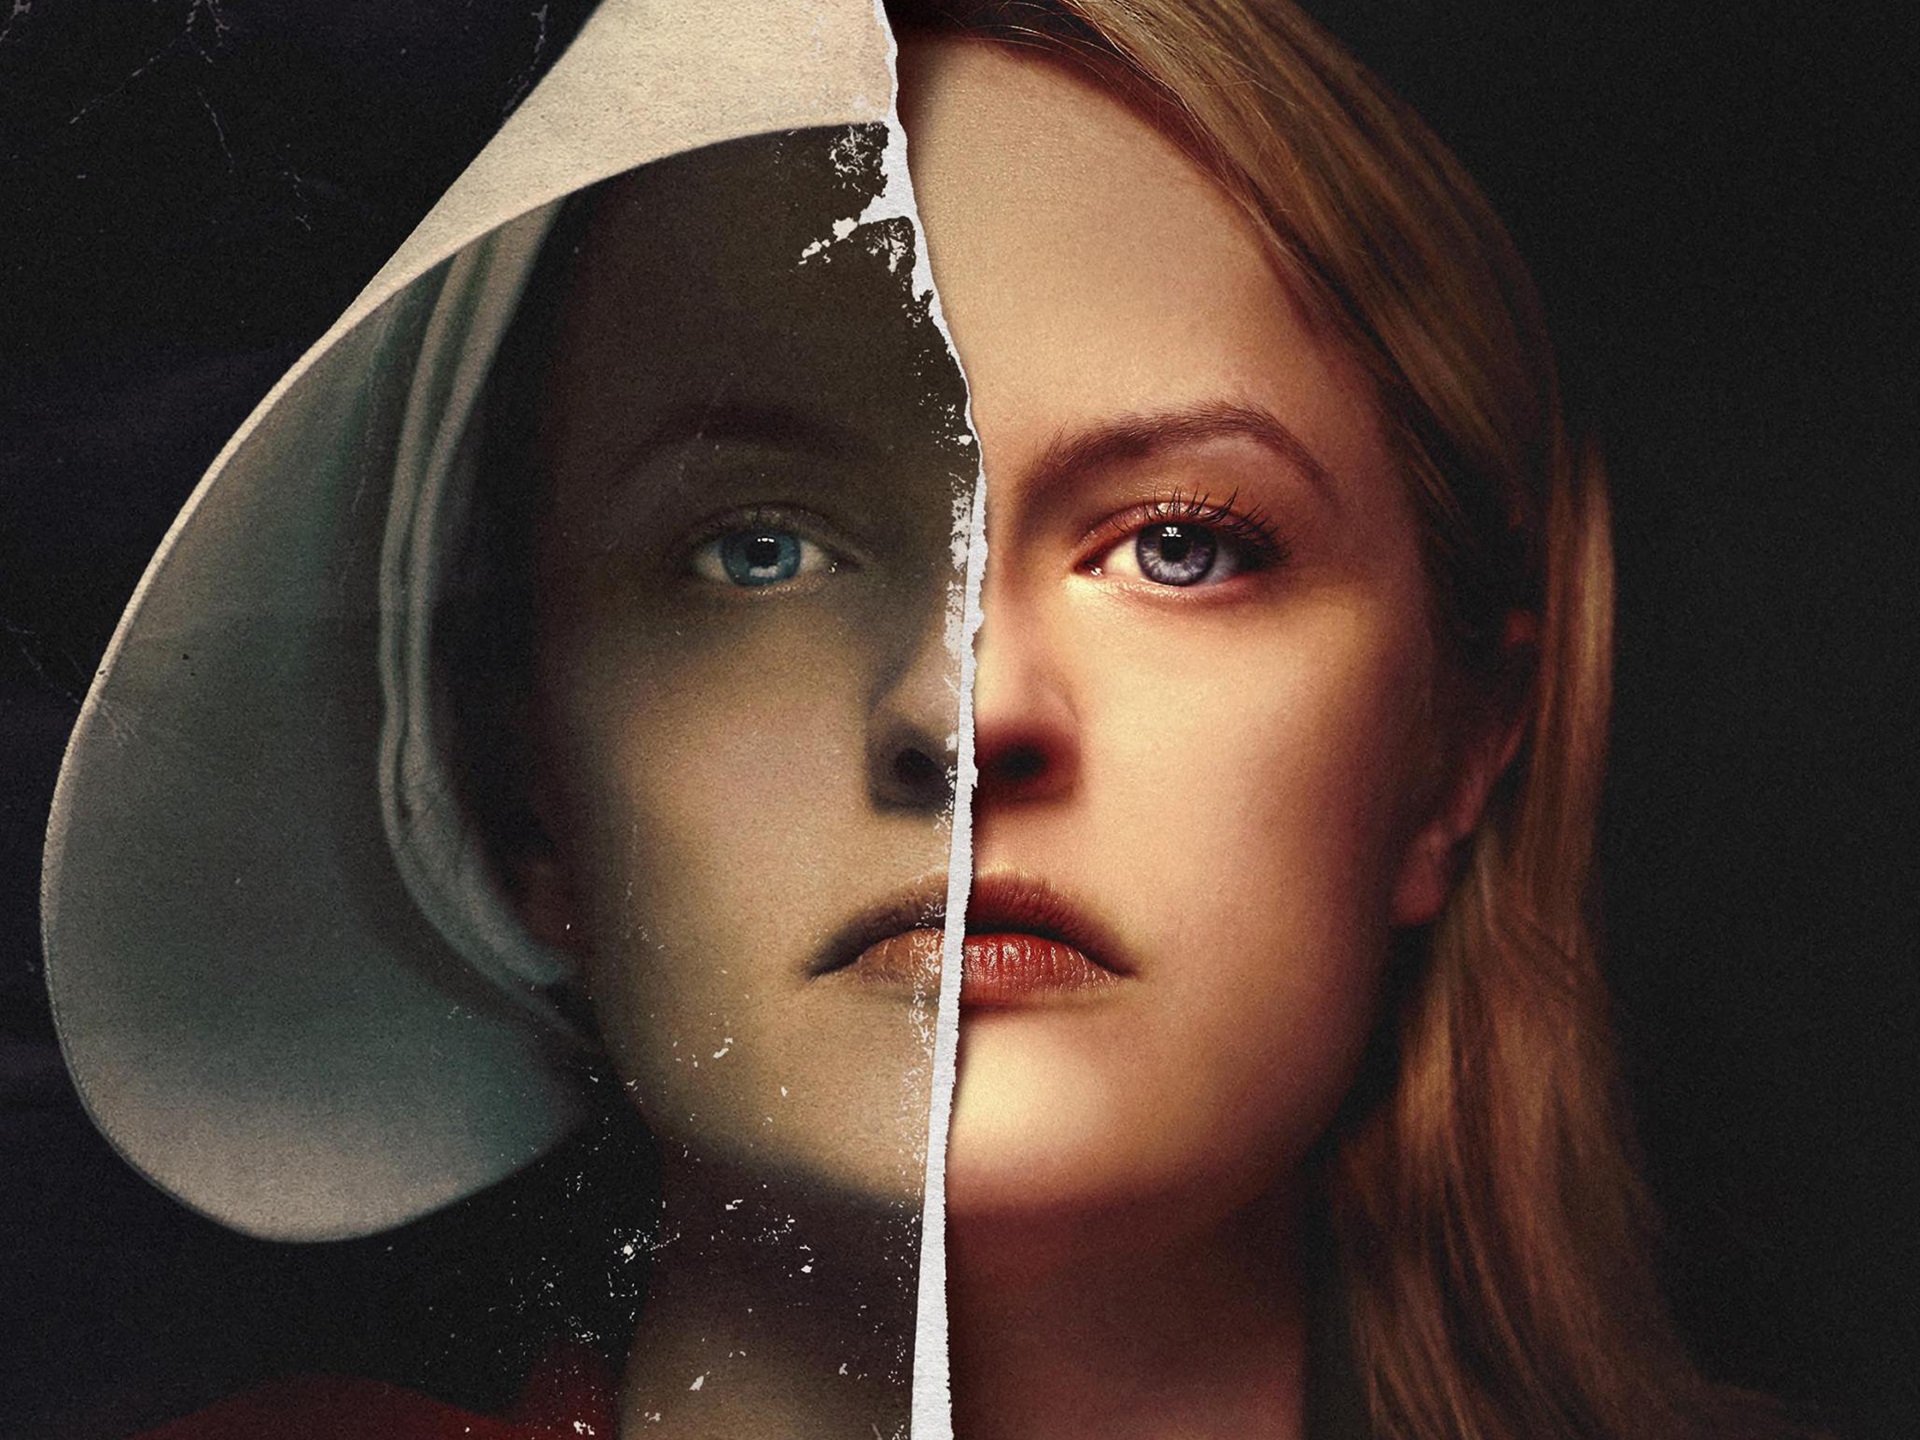 The Handmaids Tale Wallpapers